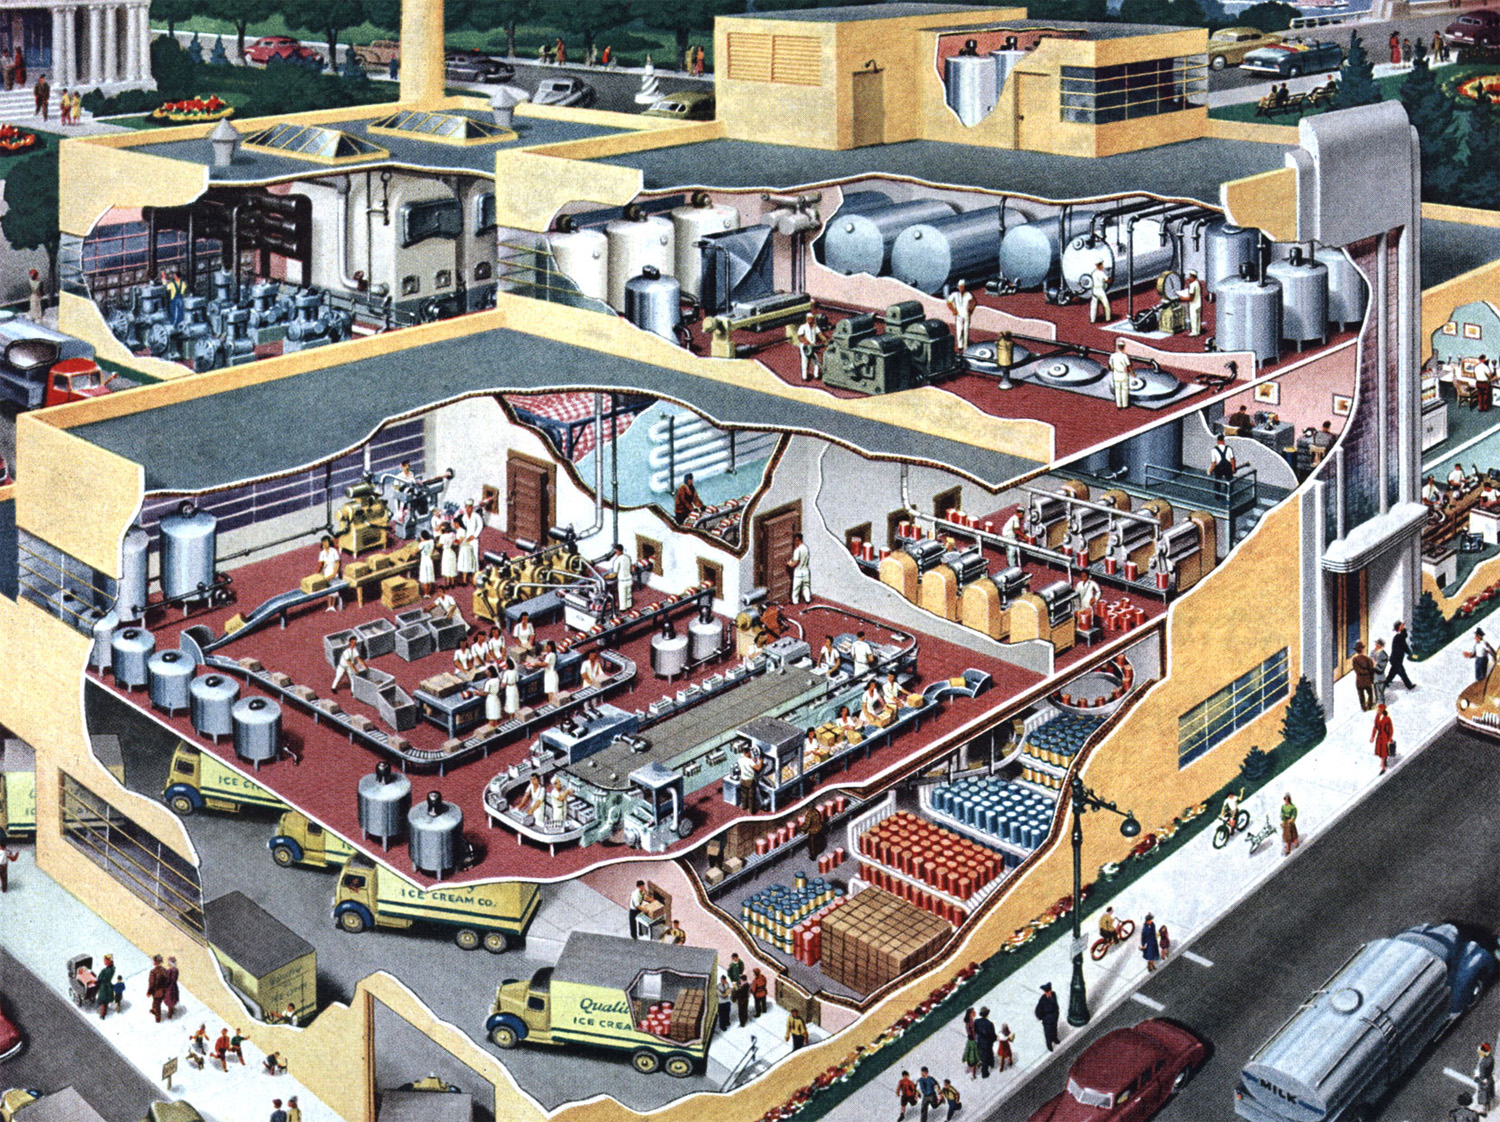 27 Cutaway Drawings That Show All The Secrets Of Buildings